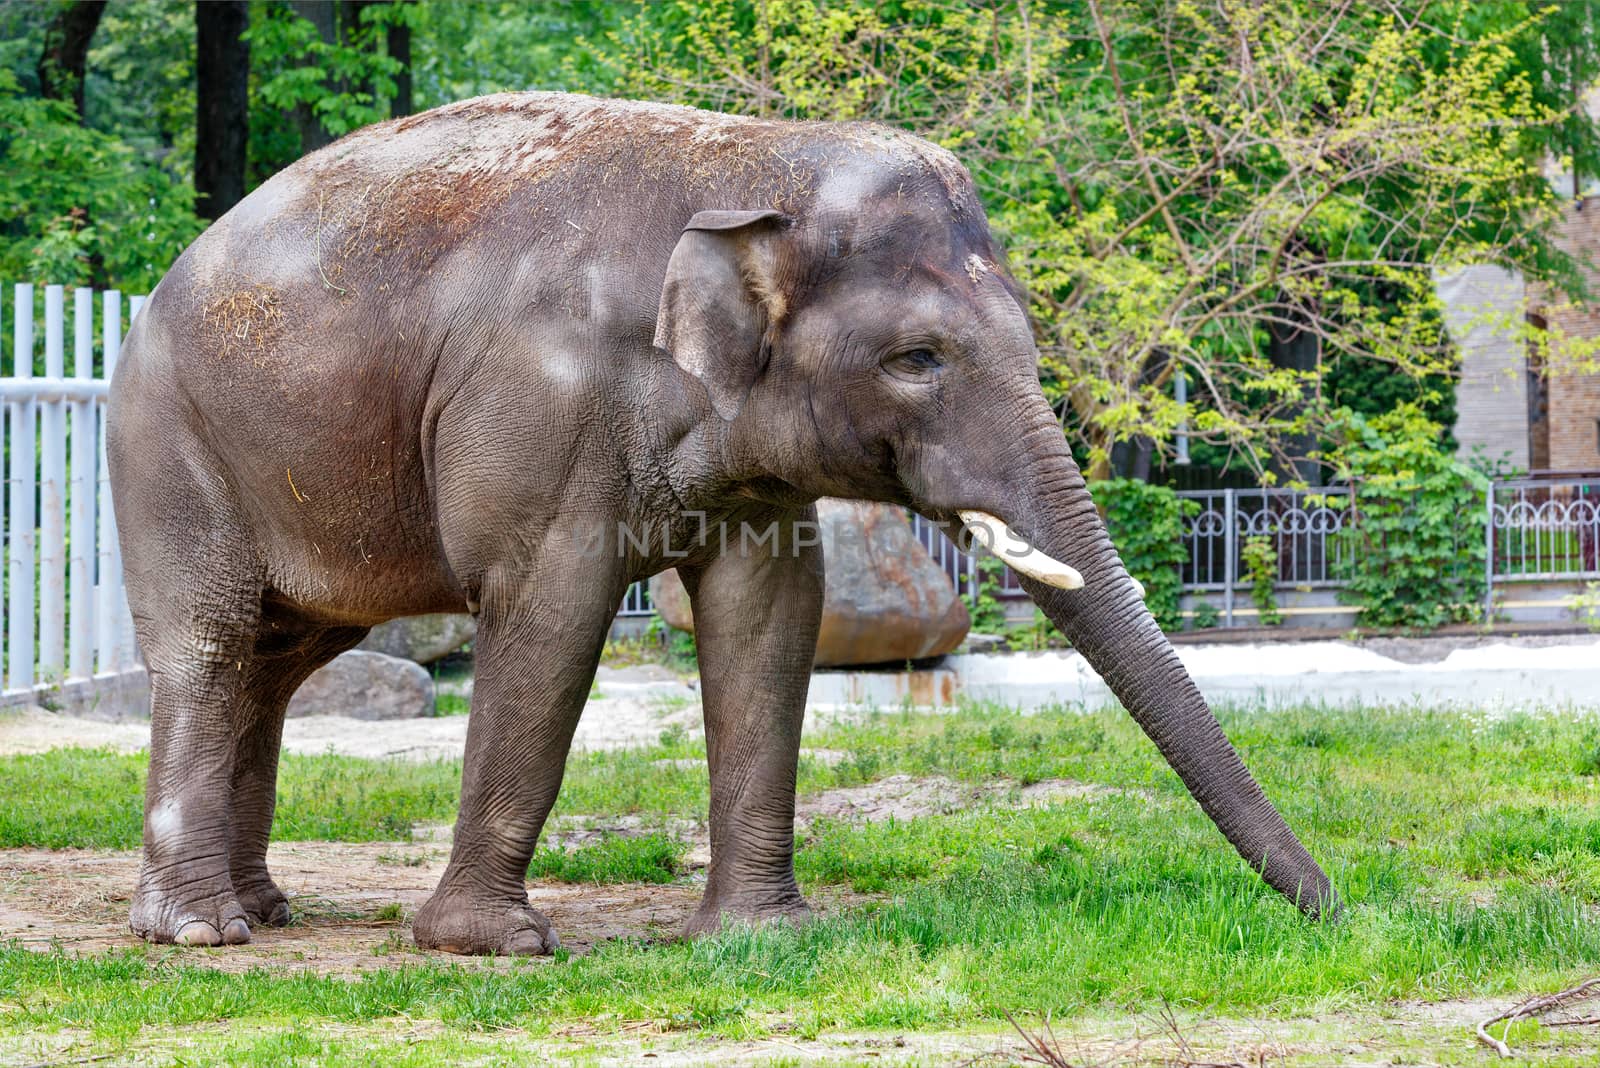 A young elephant, covered in dust and dry grass, extends its trunk and collects green juicy grass in a spring park.